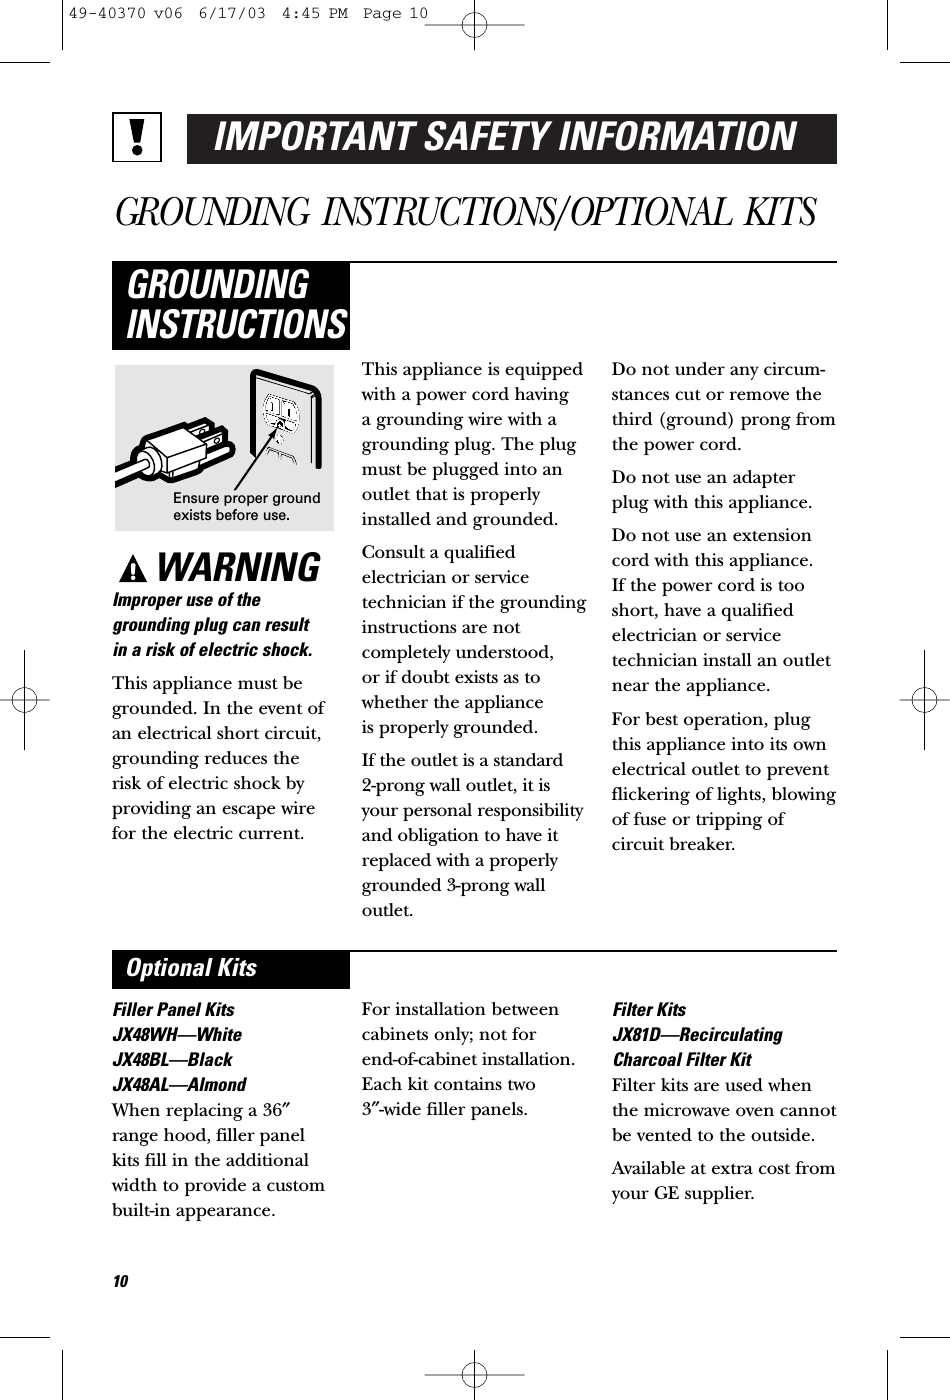 IMPORTANT SAFETY INFORMATIONGROUNDING INSTRUCTIONS/OPTIONAL KITSWARNINGImproper use of thegrounding plug can result in a risk of electric shock.This appliance must begrounded. In the event ofan electrical short circuit,grounding reduces the risk of electric shock byproviding an escape wirefor the electric current. This appliance is equippedwith a power cord having a grounding wire with agrounding plug. The plugmust be plugged into anoutlet that is properlyinstalled and grounded.Consult a qualified electrician or servicetechnician if the groundinginstructions are notcompletely understood, or if doubt exists as towhether the appliance is properly grounded.If the outlet is a standard 2-prong wall outlet, it isyour personal responsibilityand obligation to have itreplaced with a properlygrounded 3-prong walloutlet.Do not under any circum-stances cut or remove thethird (ground) prong fromthe power cord.Do not use an adapterplug with this appliance.Do not use an extensioncord with this appliance. If the power cord is tooshort, have a qualifiedelectrician or servicetechnician install an outletnear the appliance.For best operation, plugthis appliance into its ownelectrical outlet to preventflickering of lights, blowingof fuse or tripping ofcircuit breaker.GROUNDINGINSTRUCTIONSFiller Panel KitsJX48WH—WhiteJX48BL—BlackJX48AL—AlmondWhen replacing a 36″range hood, filler panelkits fill in the additionalwidth to provide a custom built-in appearance. For installation betweencabinets only; not for end-of-cabinet installation.Each kit contains two 3″-wide filler panels.Filter KitsJX81D—RecirculatingCharcoal Filter KitFilter kits are used whenthe microwave oven cannotbe vented to the outside.Available at extra cost fromyour GE supplier.Optional KitsEnsure proper groundexists before use.1049-40370 v06  6/17/03  4:45 PM  Page 10